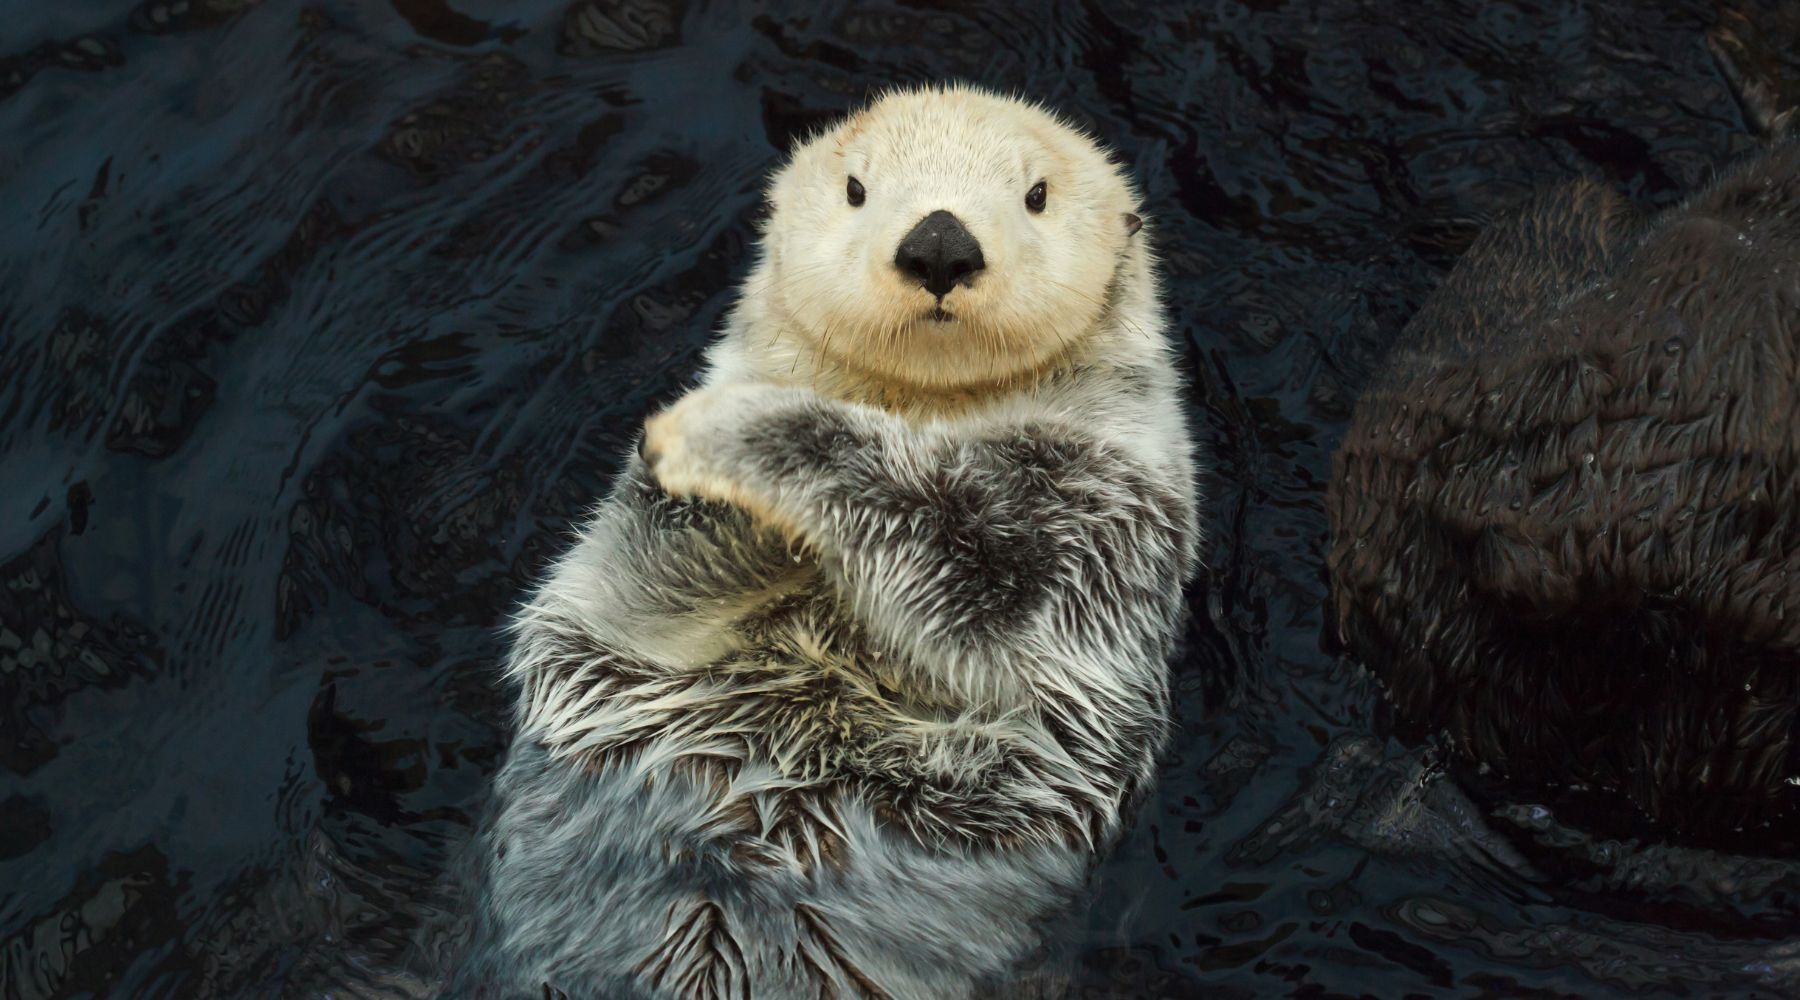 Sea otter in water